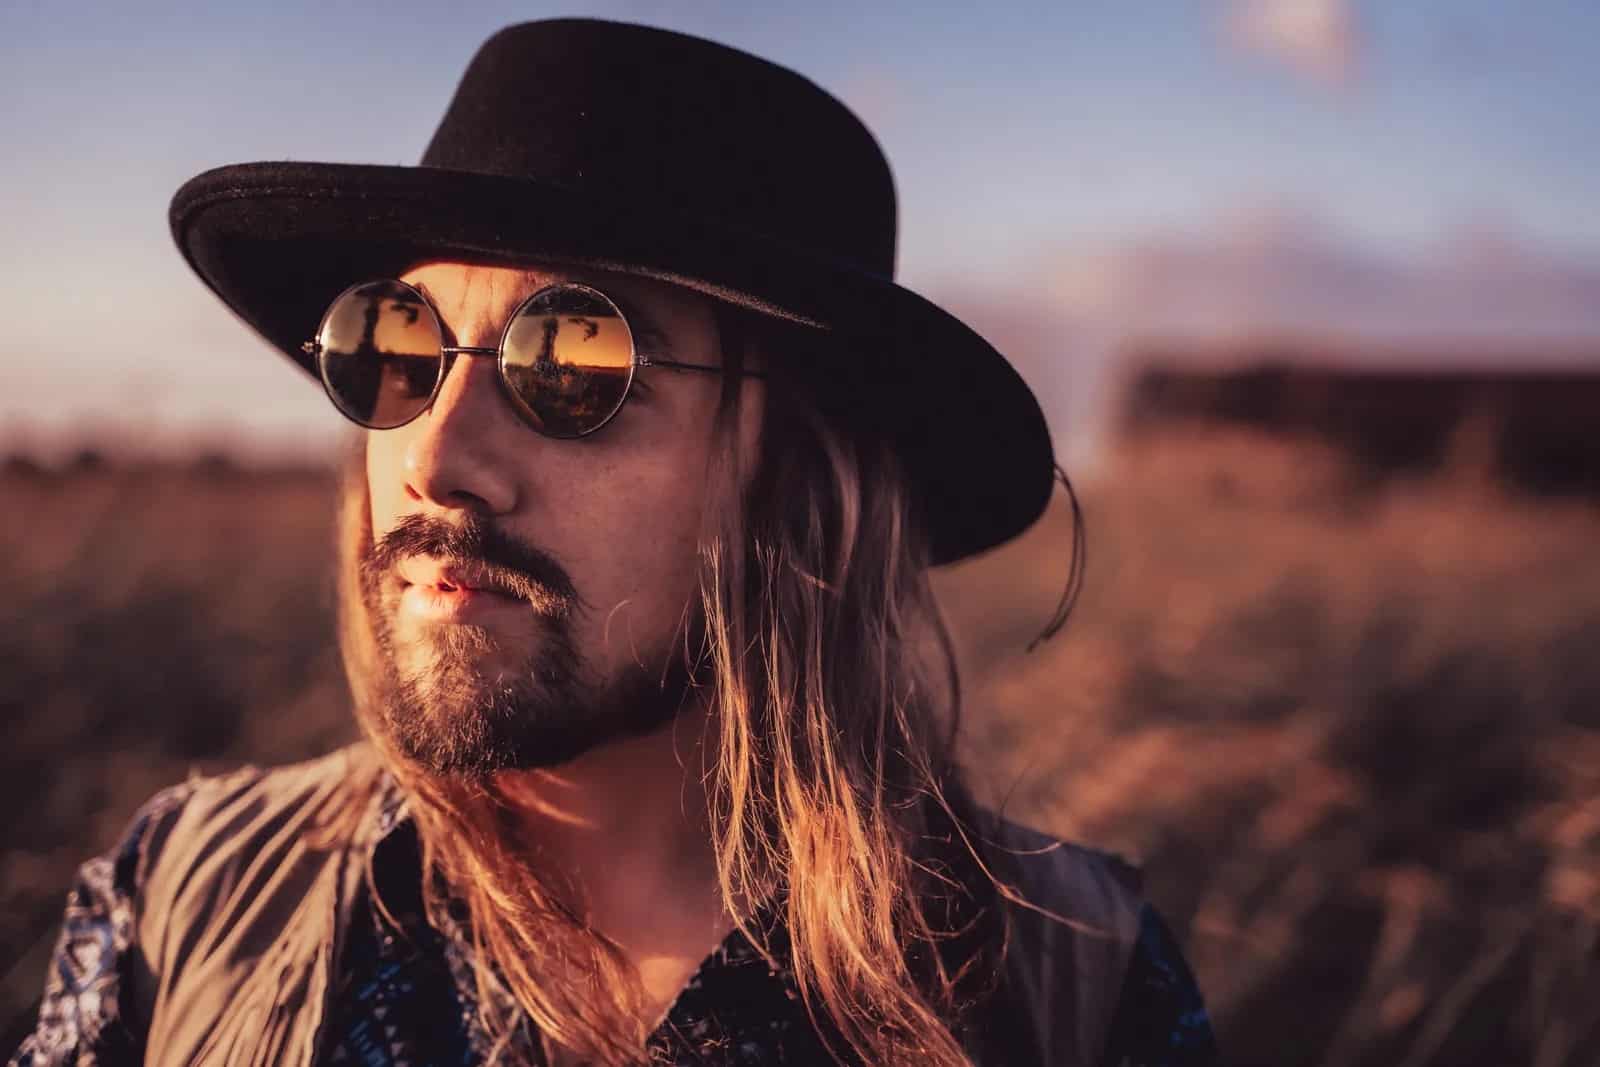 A portrait of Justin Larkin, a man with long brown hair and a trimmed beard with John Lennon glasses and a flat brim western style hat, outside at sunset in a desert setting.